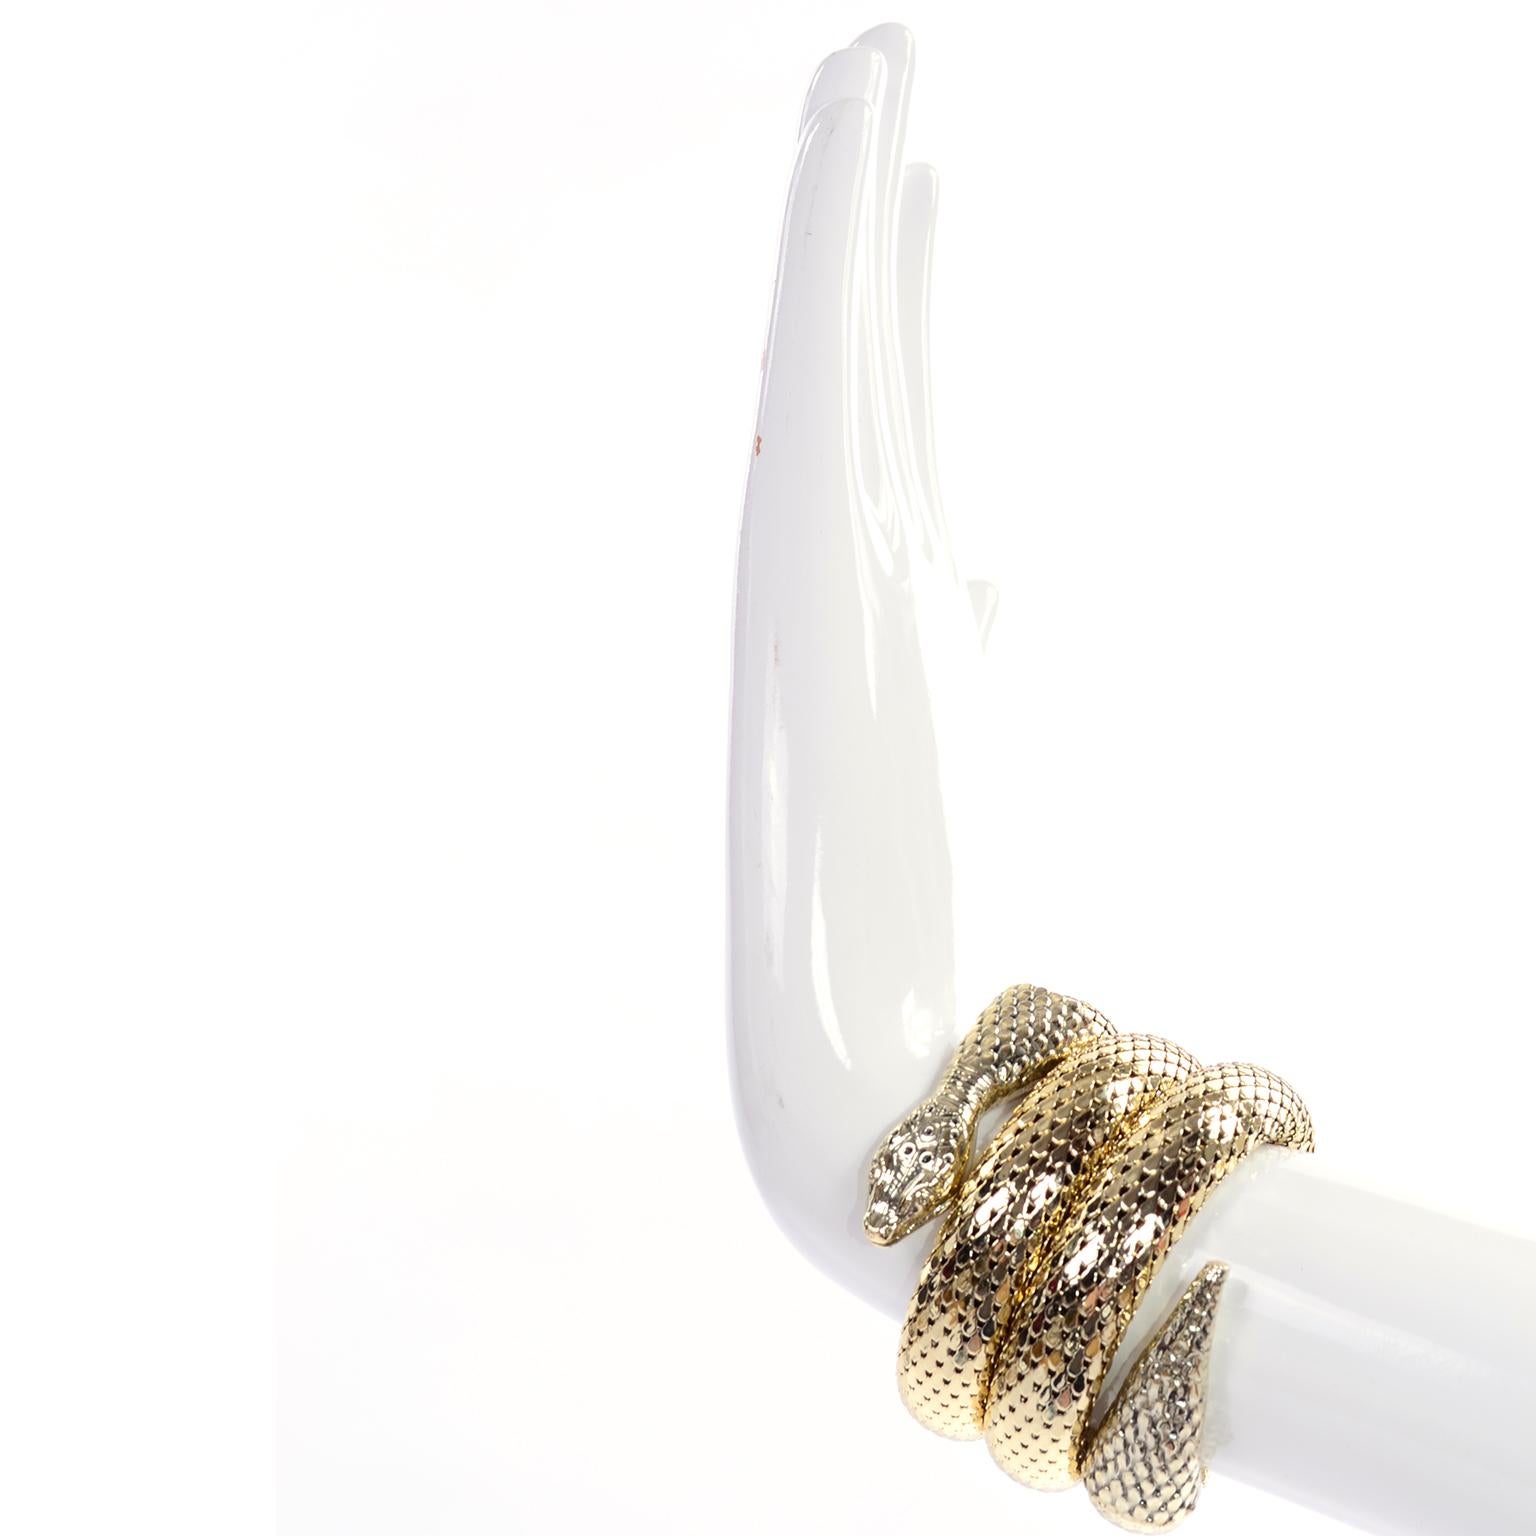 We love snake bracelets and this is one of our favorites!  This Egyptian revival 1970's gold mesh vintage coil bracelet is stamped Whiting and Davis and is the same quality you'd expect from the company known for their beautiful mesh handbags!  We